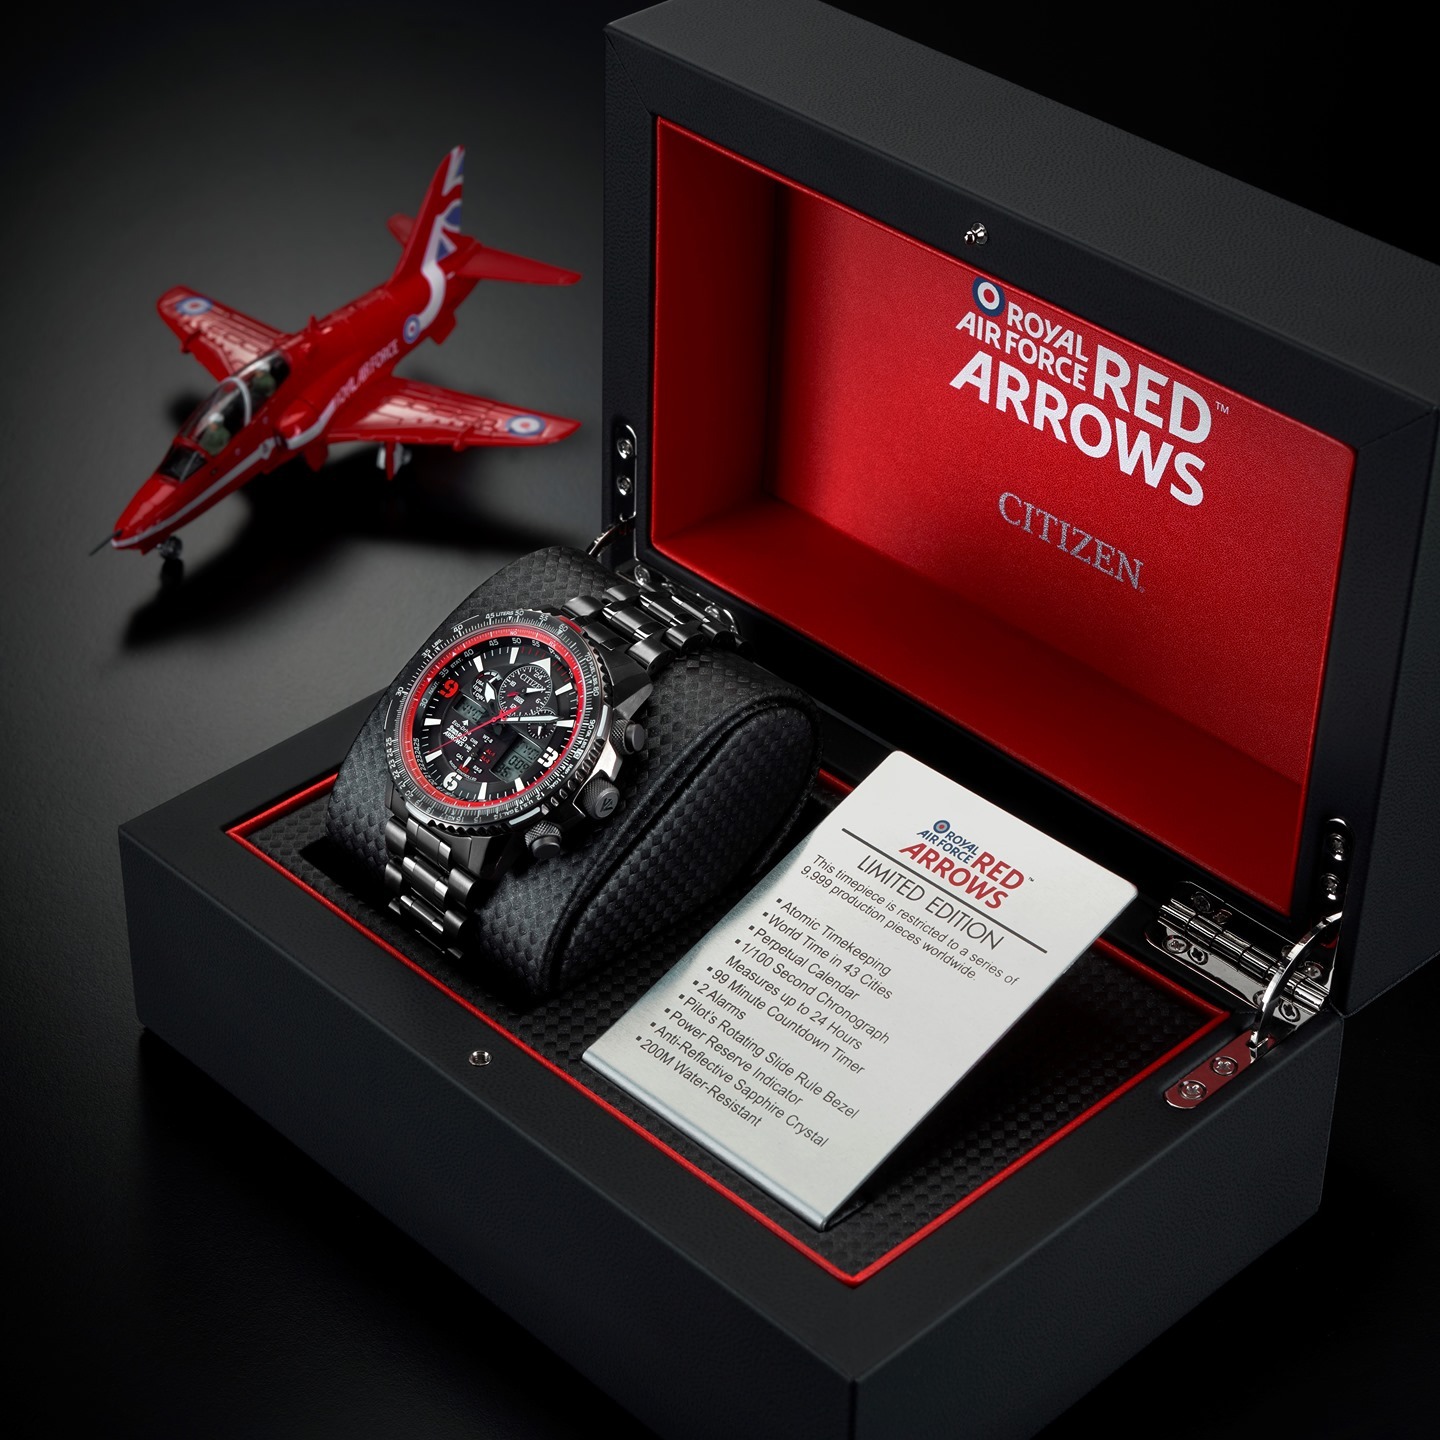 lur Vedhæftet fil analysere House of Watches on Twitter: "A partnership of professionalism and  precision - The Limited Edition @citizen_watch Red Arrows Skyhawk A-T. This  light-powered Limited Edition is packed full of style and function:  https://t.co/lb9H5dq3D3 #